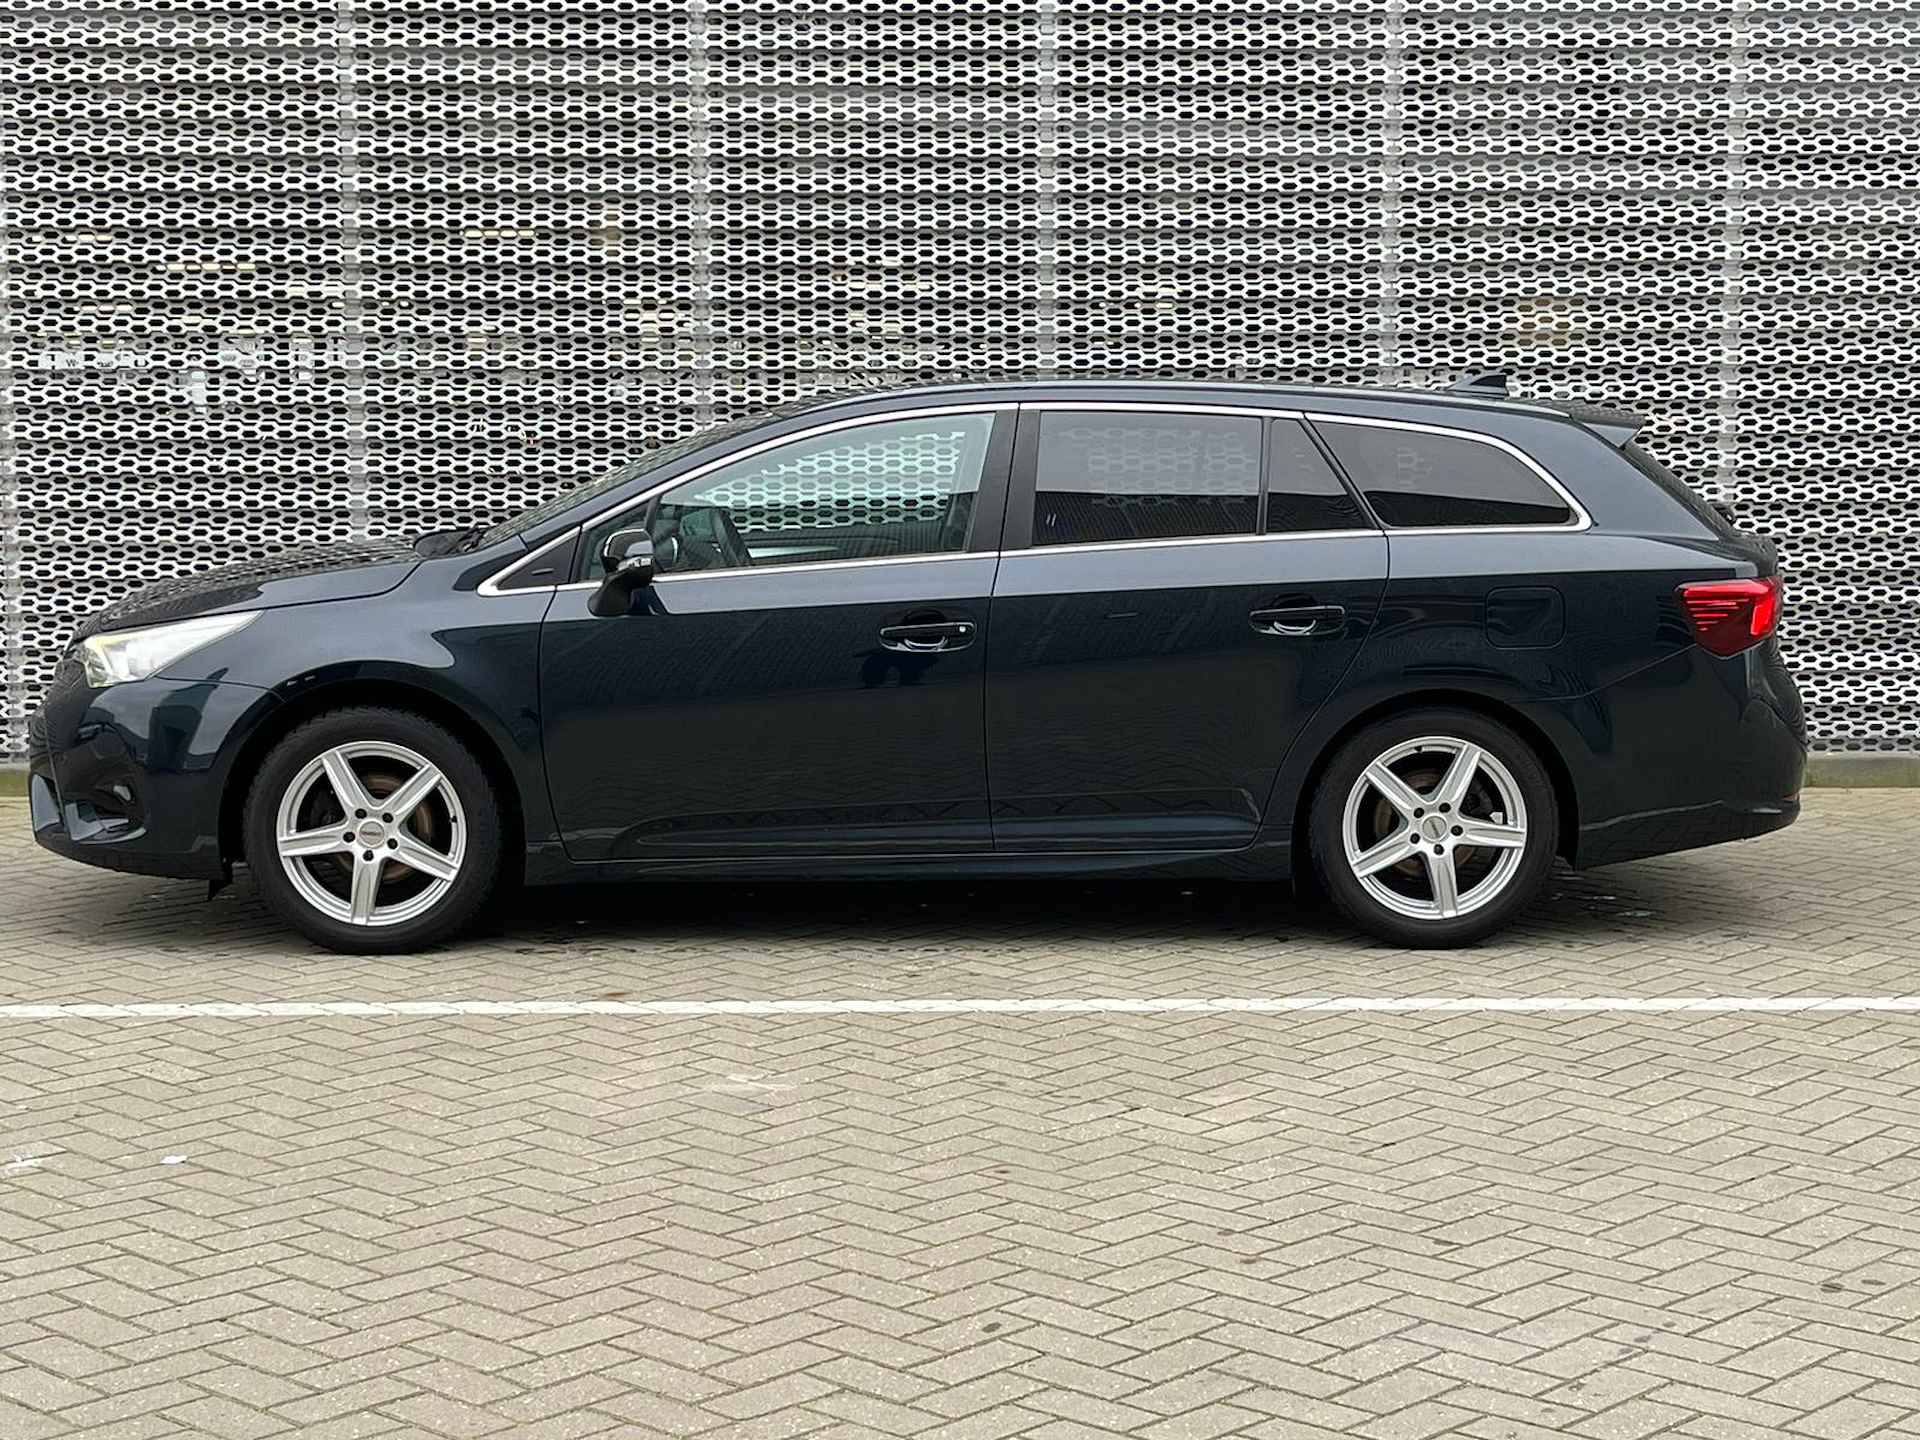 Toyota Avensis Touring Sports 1.8 VVT-i SkyView Edition - 5/28